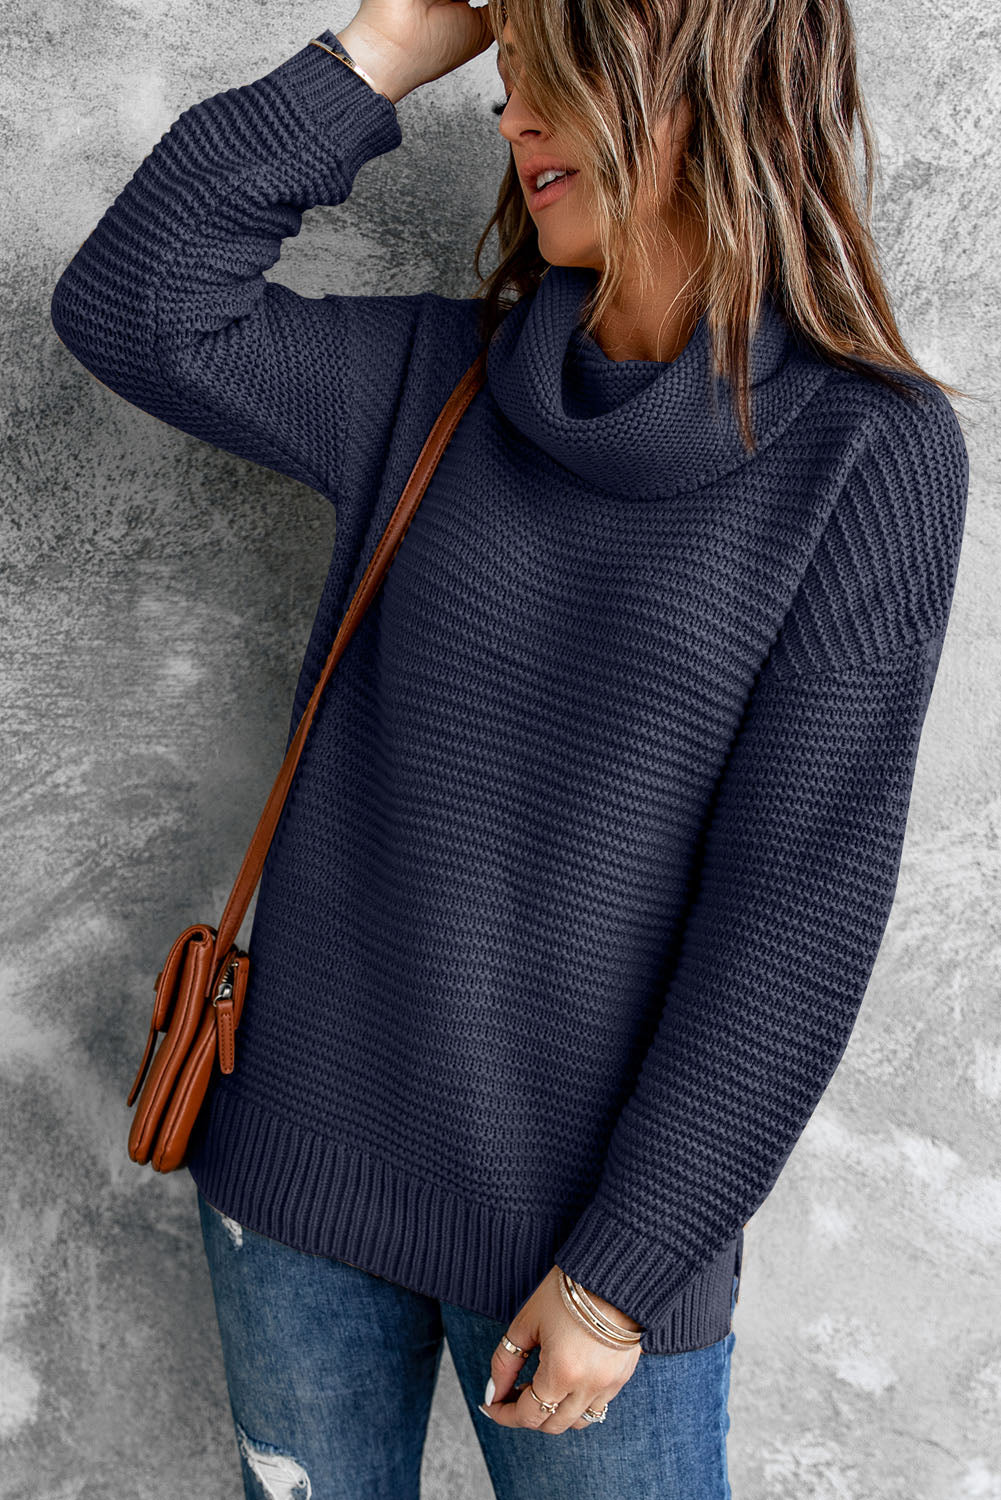 Drop and Roll Oversized Turtleneck Sweater in Green, Grey, Khaki, or Navy